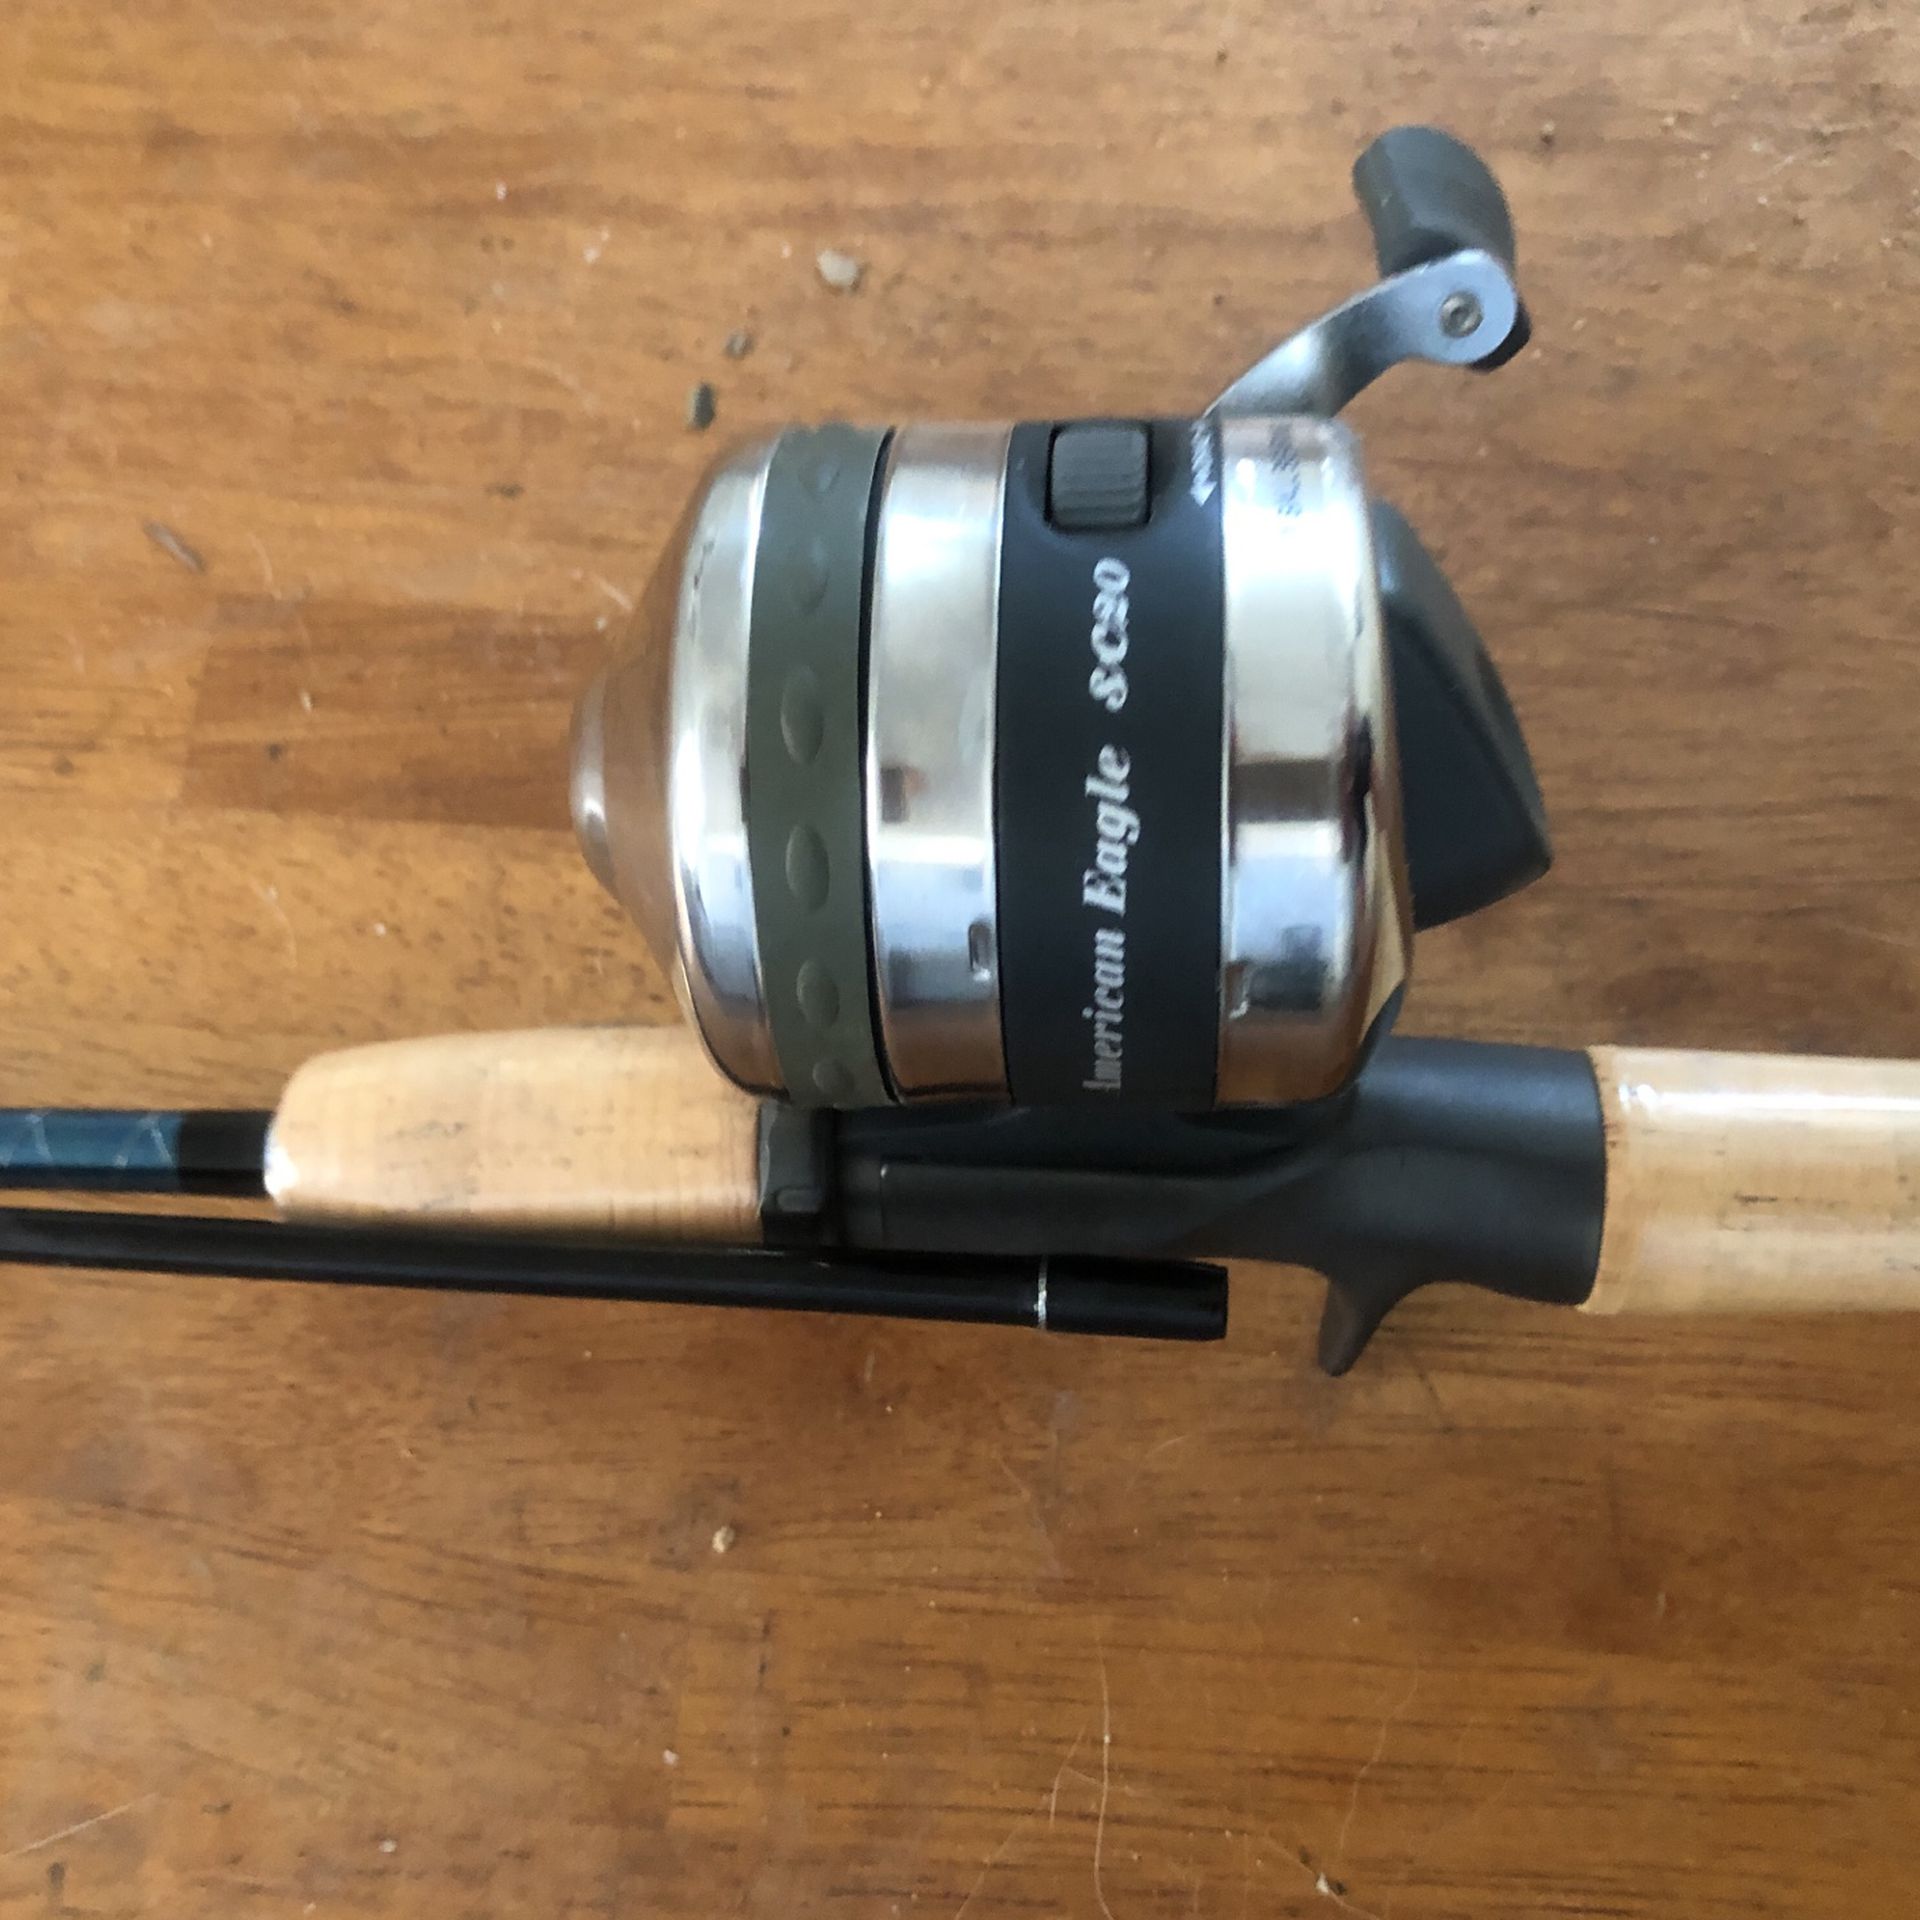 Fishing Poles American eagle new for Sale in Boulder City, NV